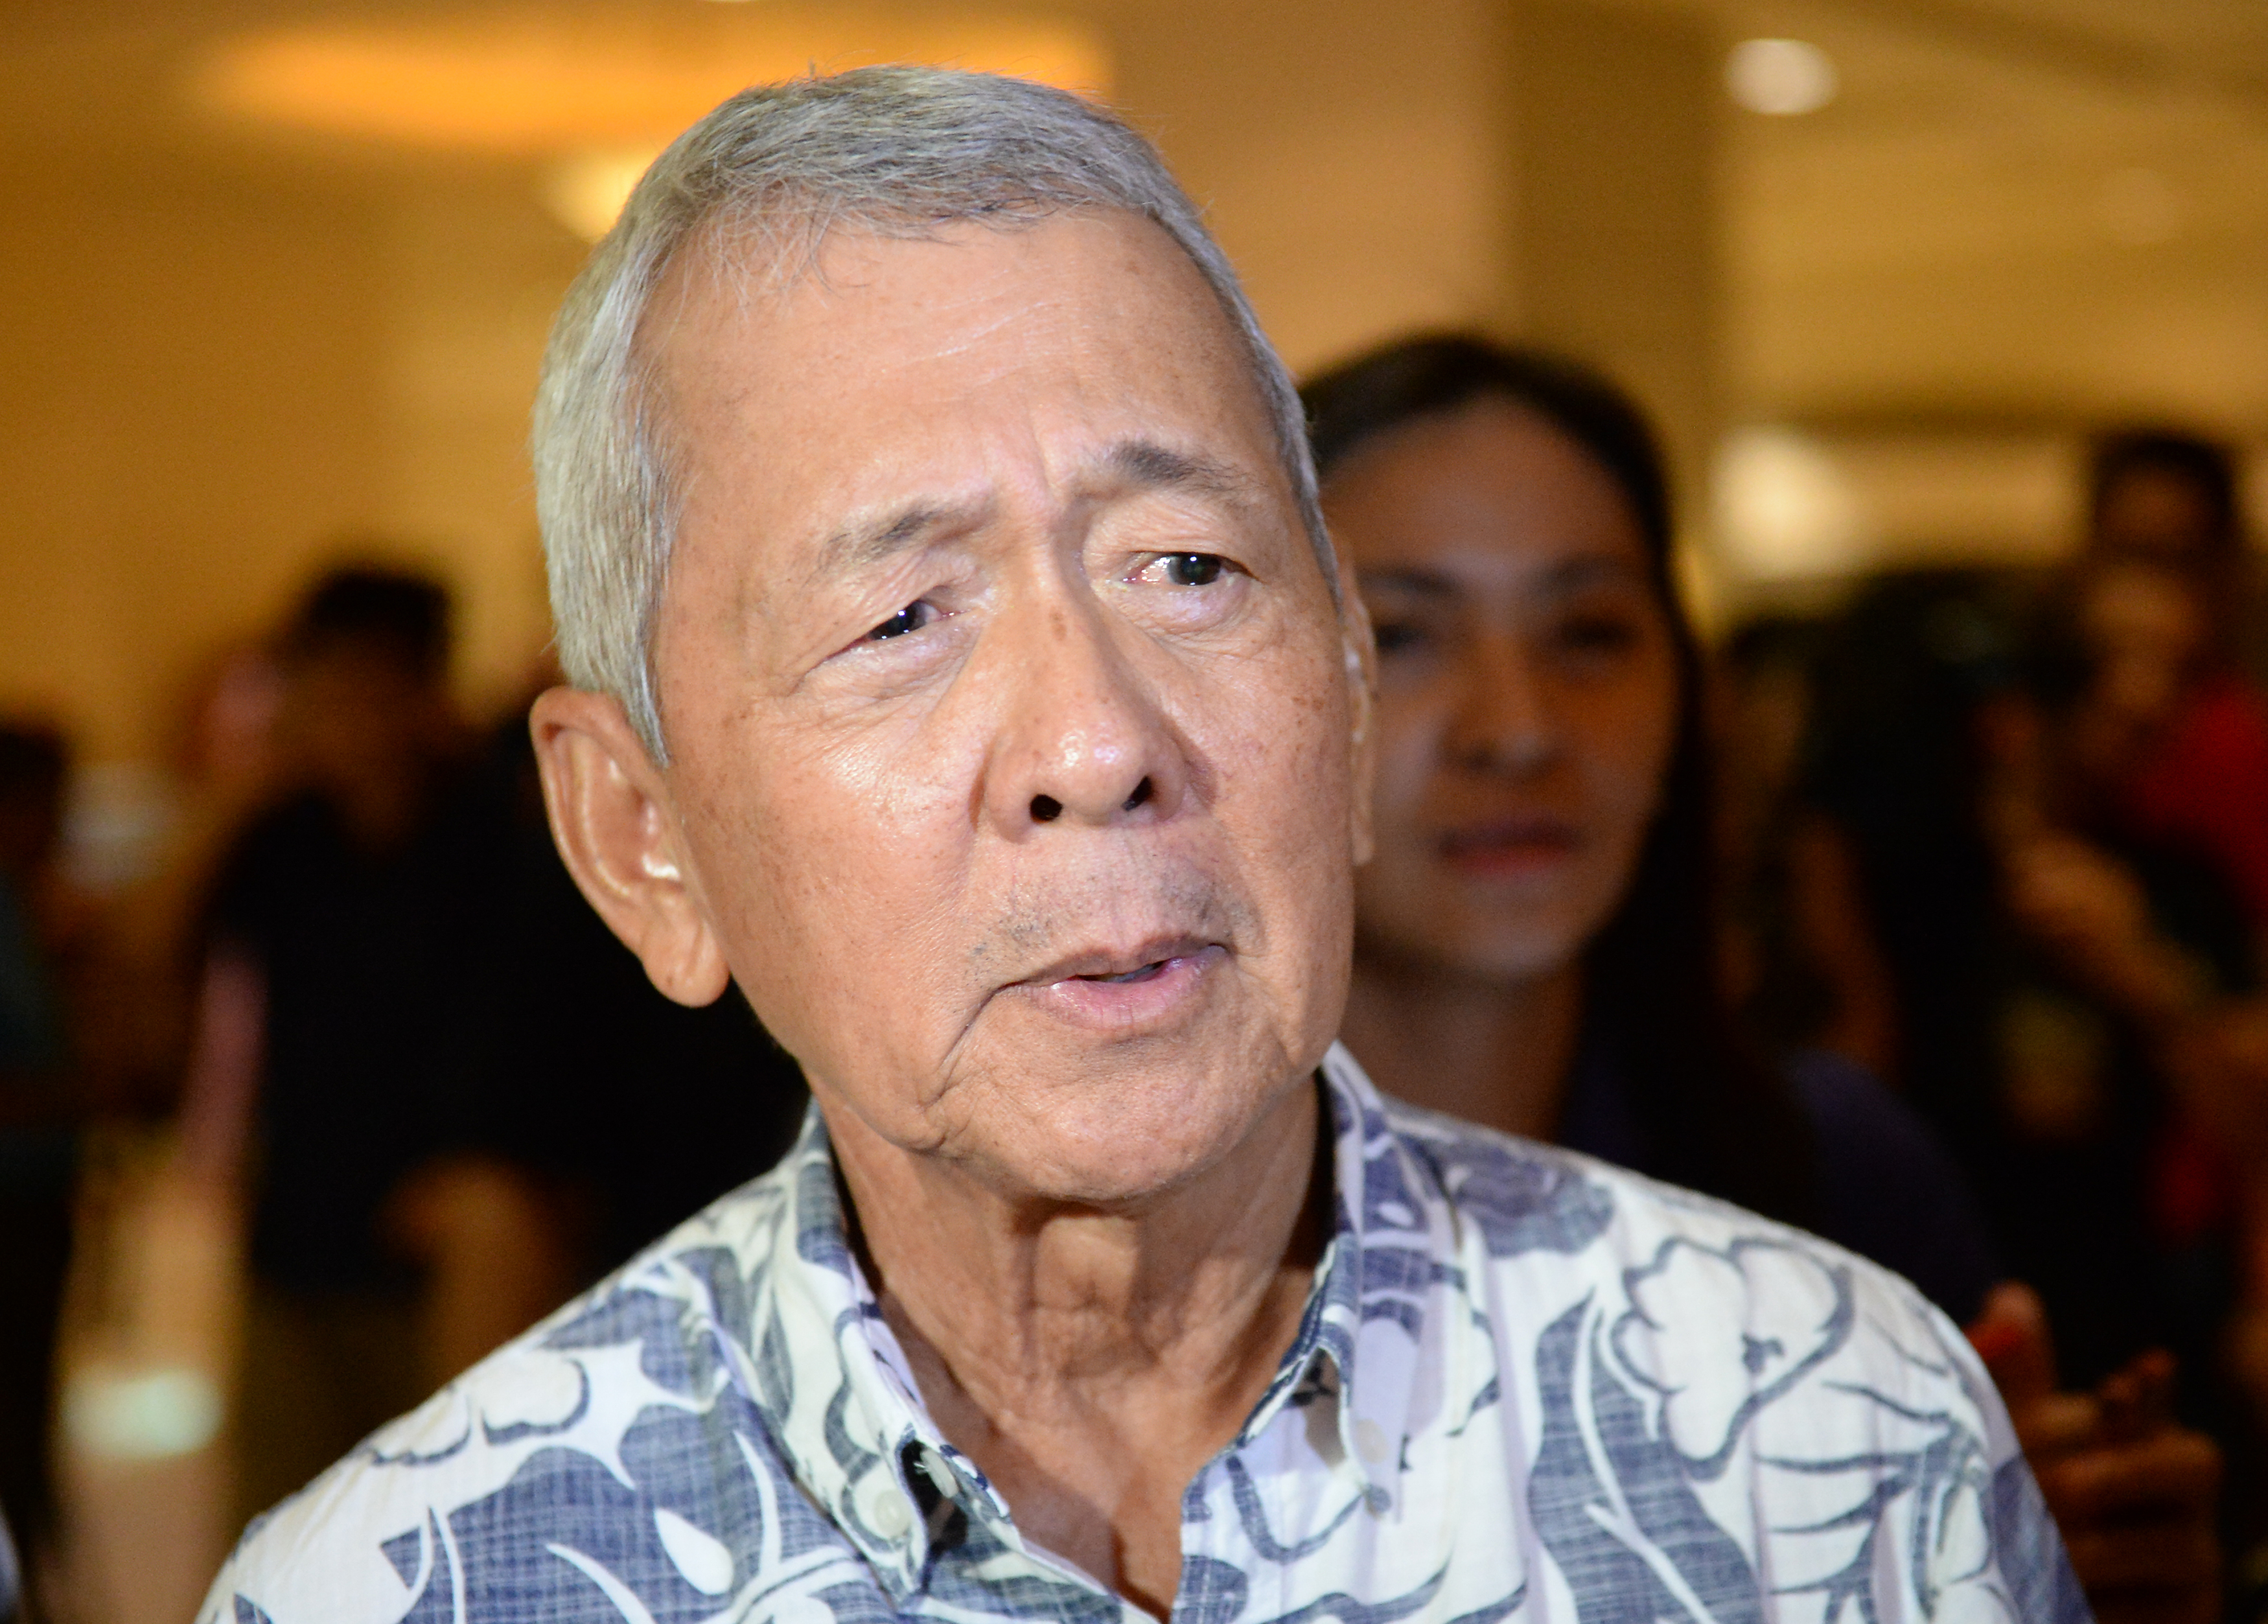 Perfecto Yasay, tapped to be the next Philippine affairs Secretary, speaks to members of the media after meeting President-elect Rodrigo Duterte, at a hotel in Davao City, insouthern island of Mindanao on May 18, 2016. / AFP PHOTO / TED ALJIBE